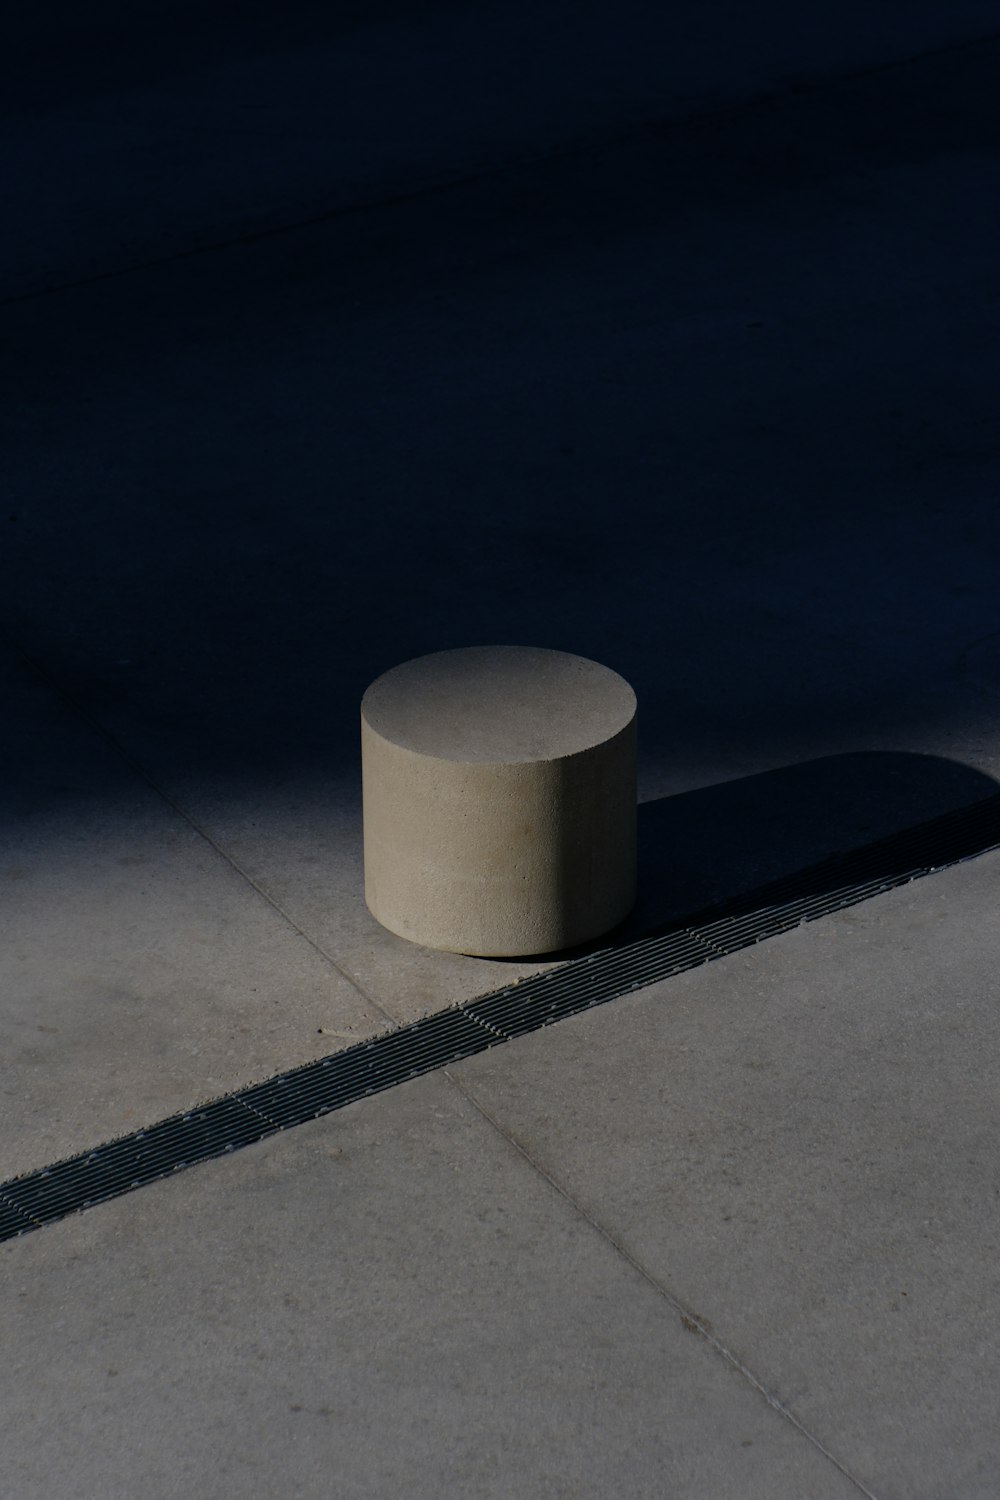 a concrete object is casting a shadow on the ground